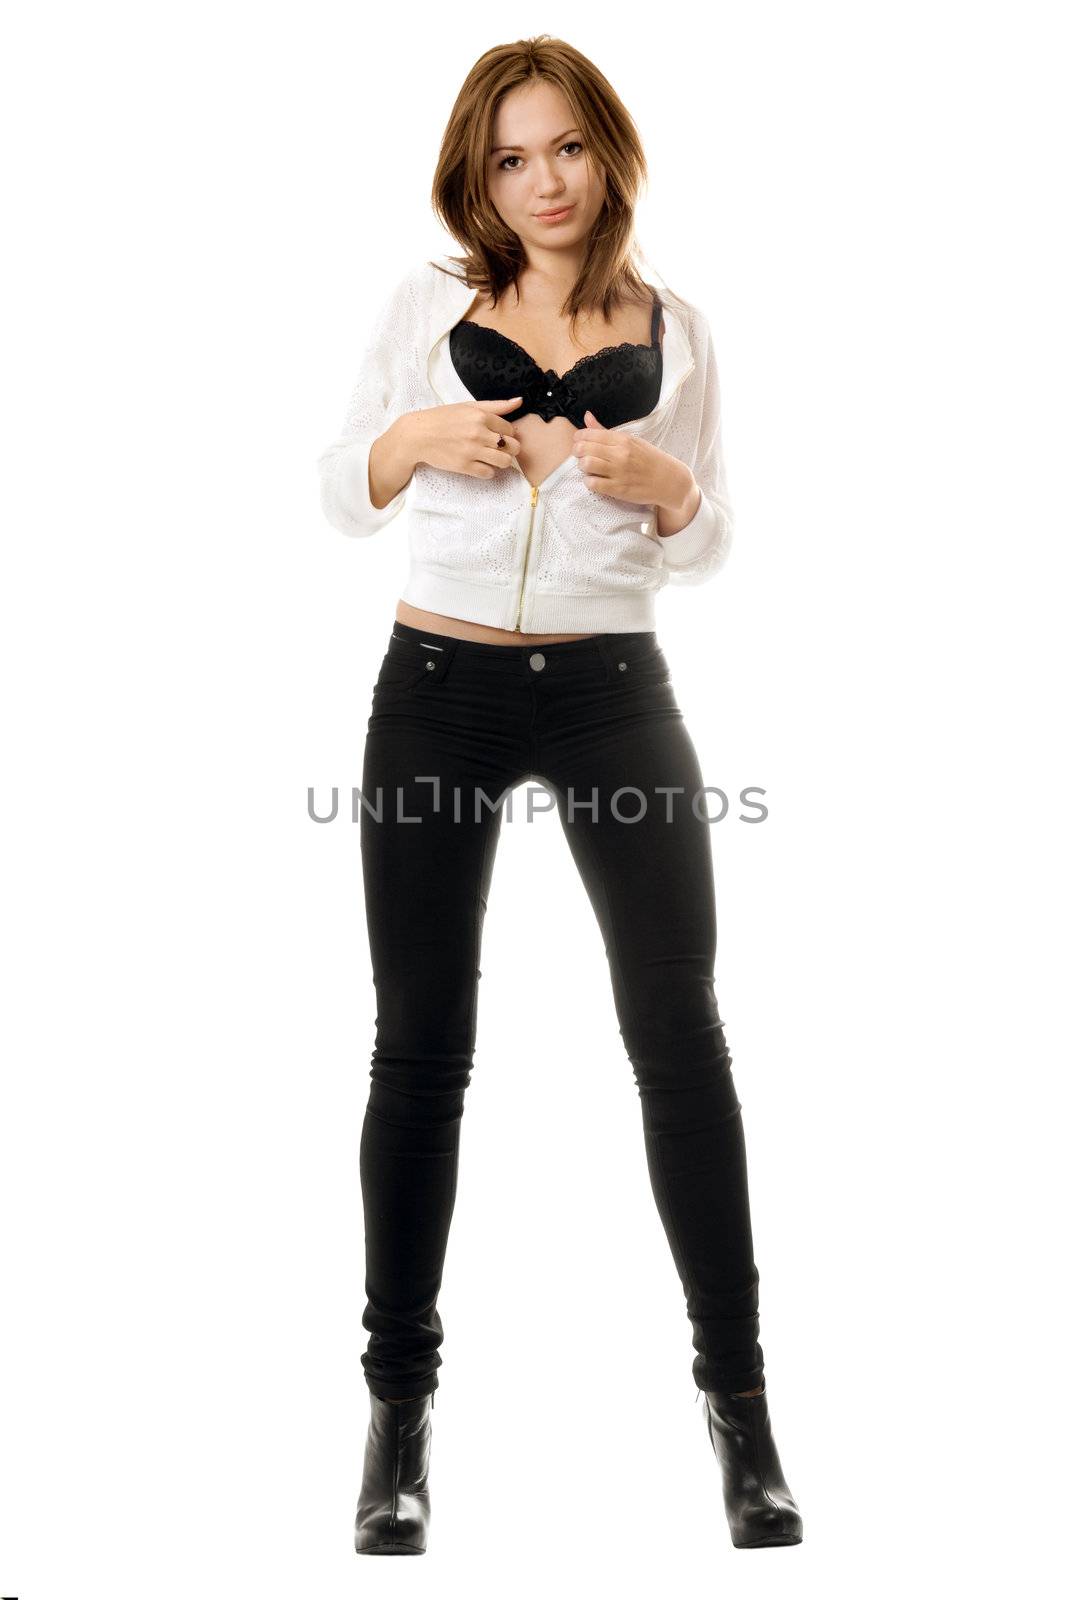 Sexy young woman in black tight jeans by acidgrey